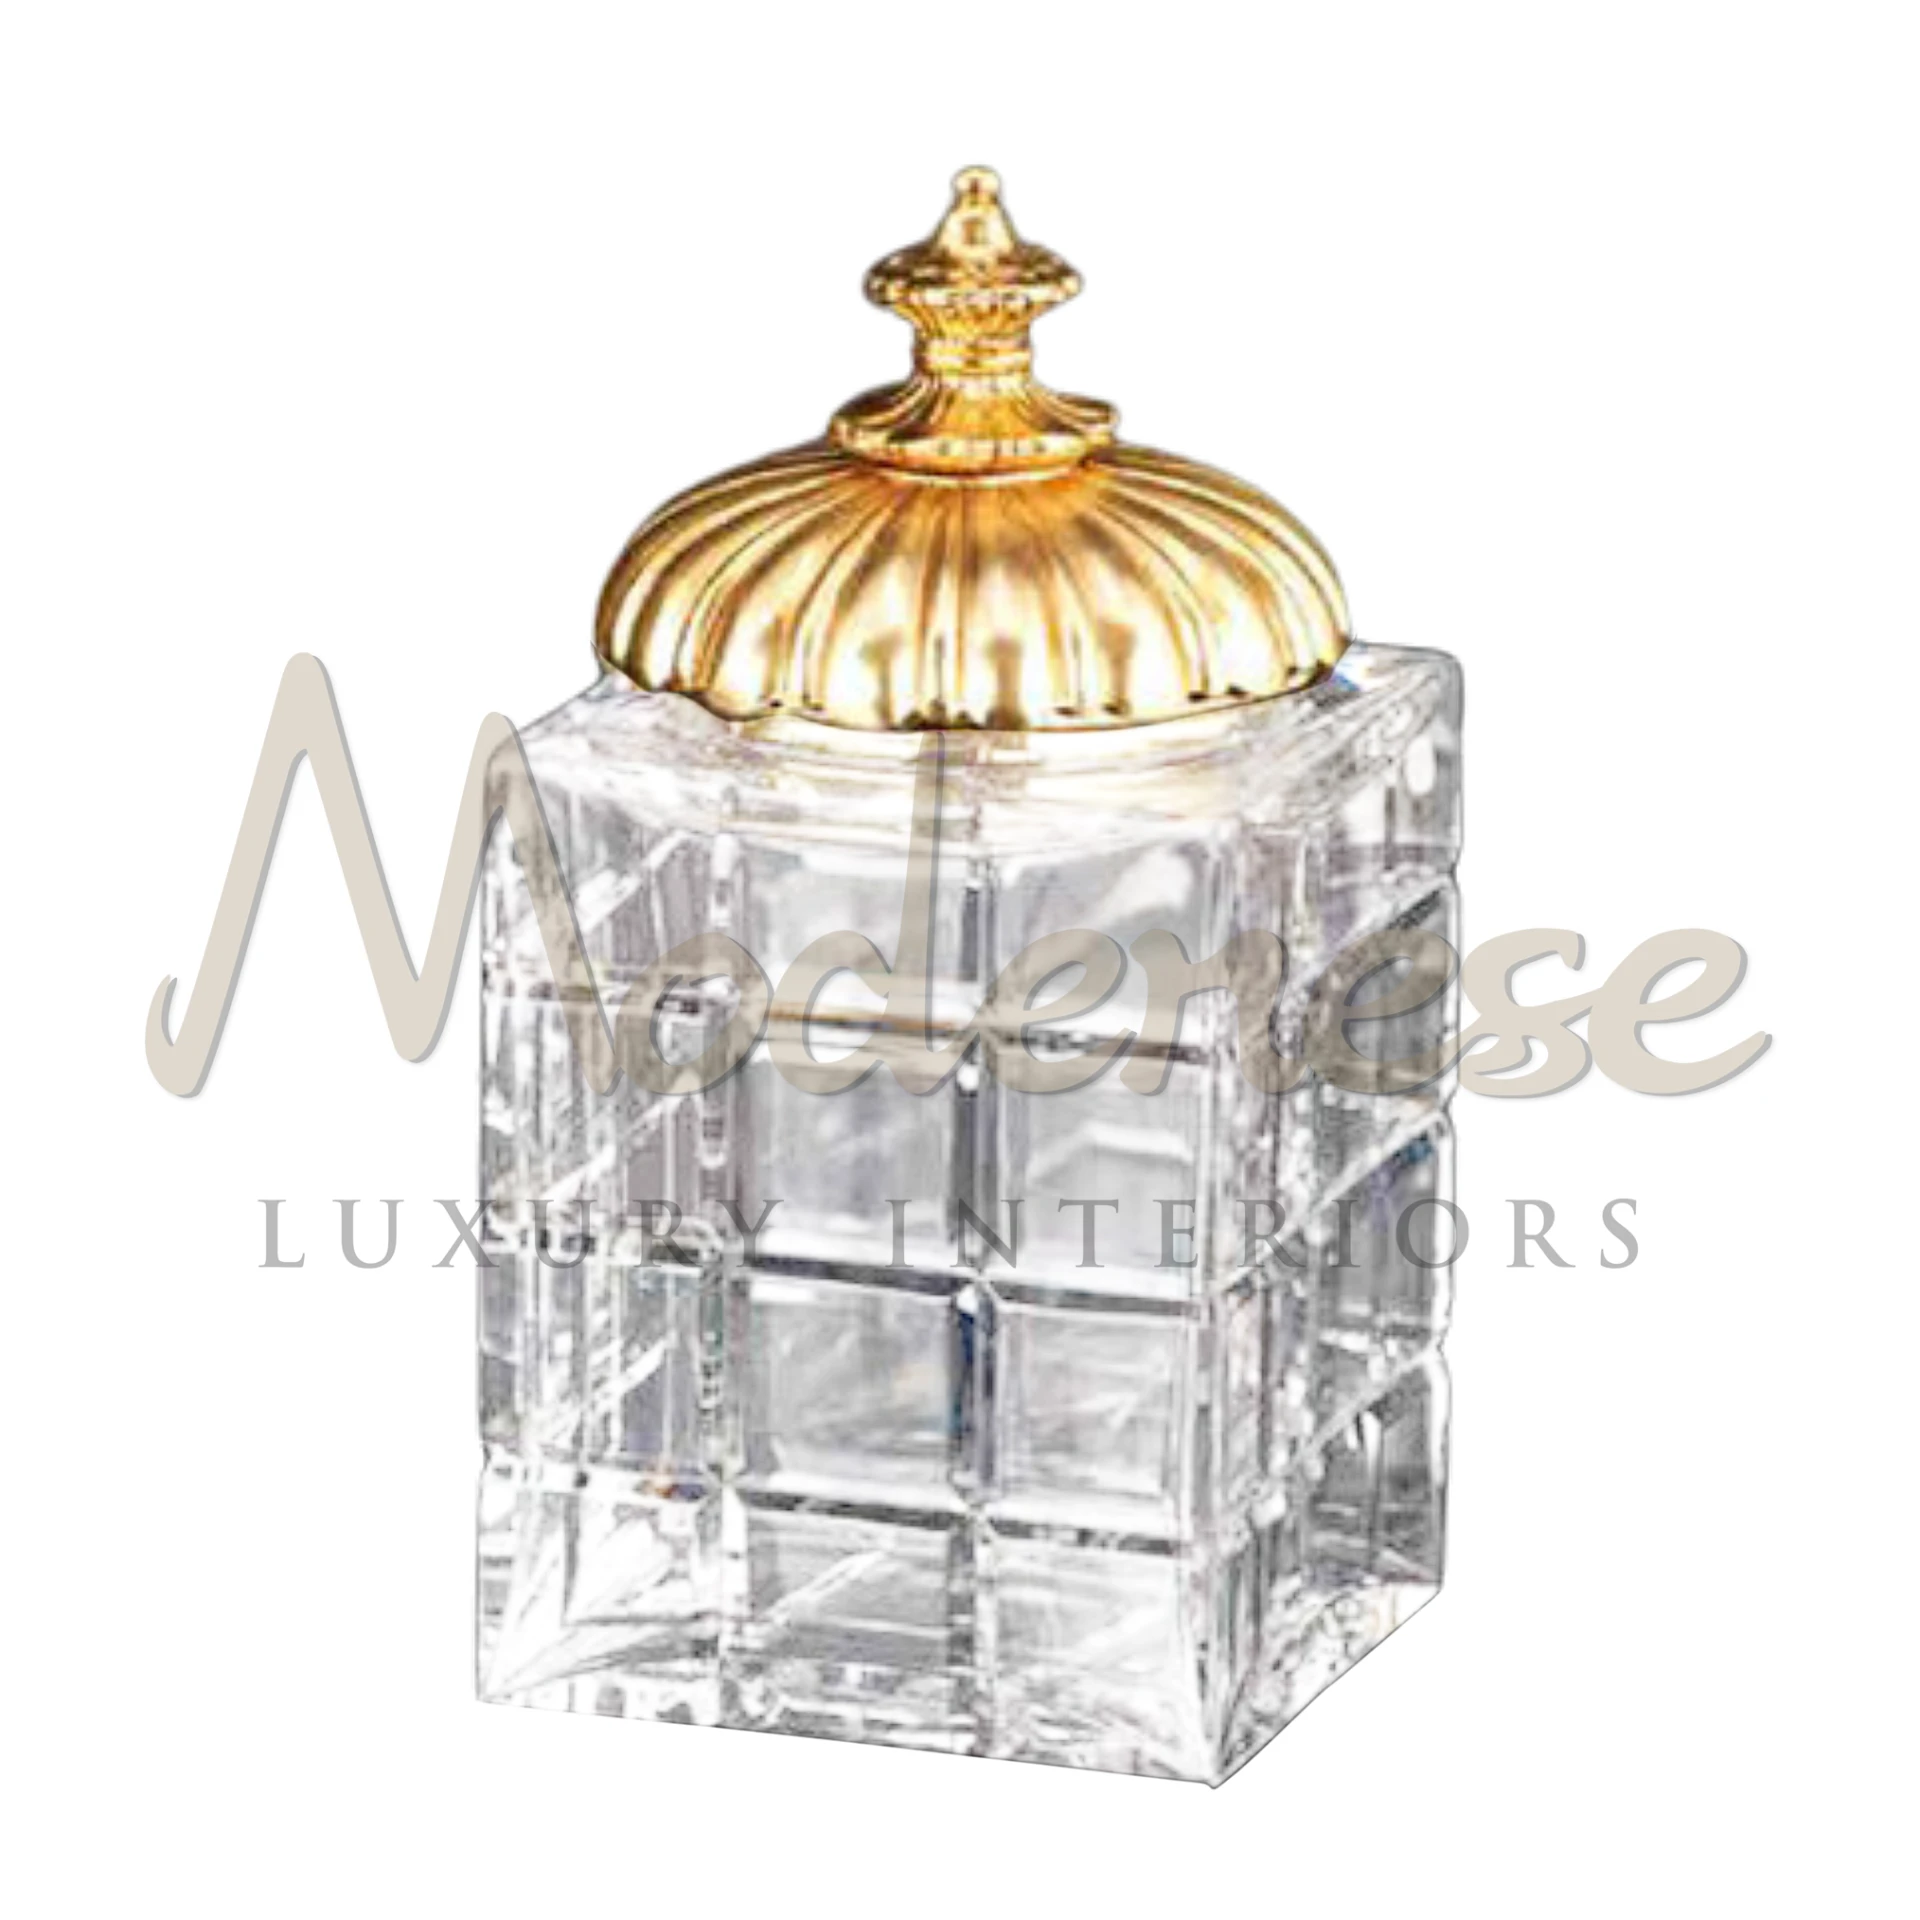 Royal Glass Box, blending functionality and elegance, ideal for storing keepsakes or displaying decorative objects in a luxurious style.